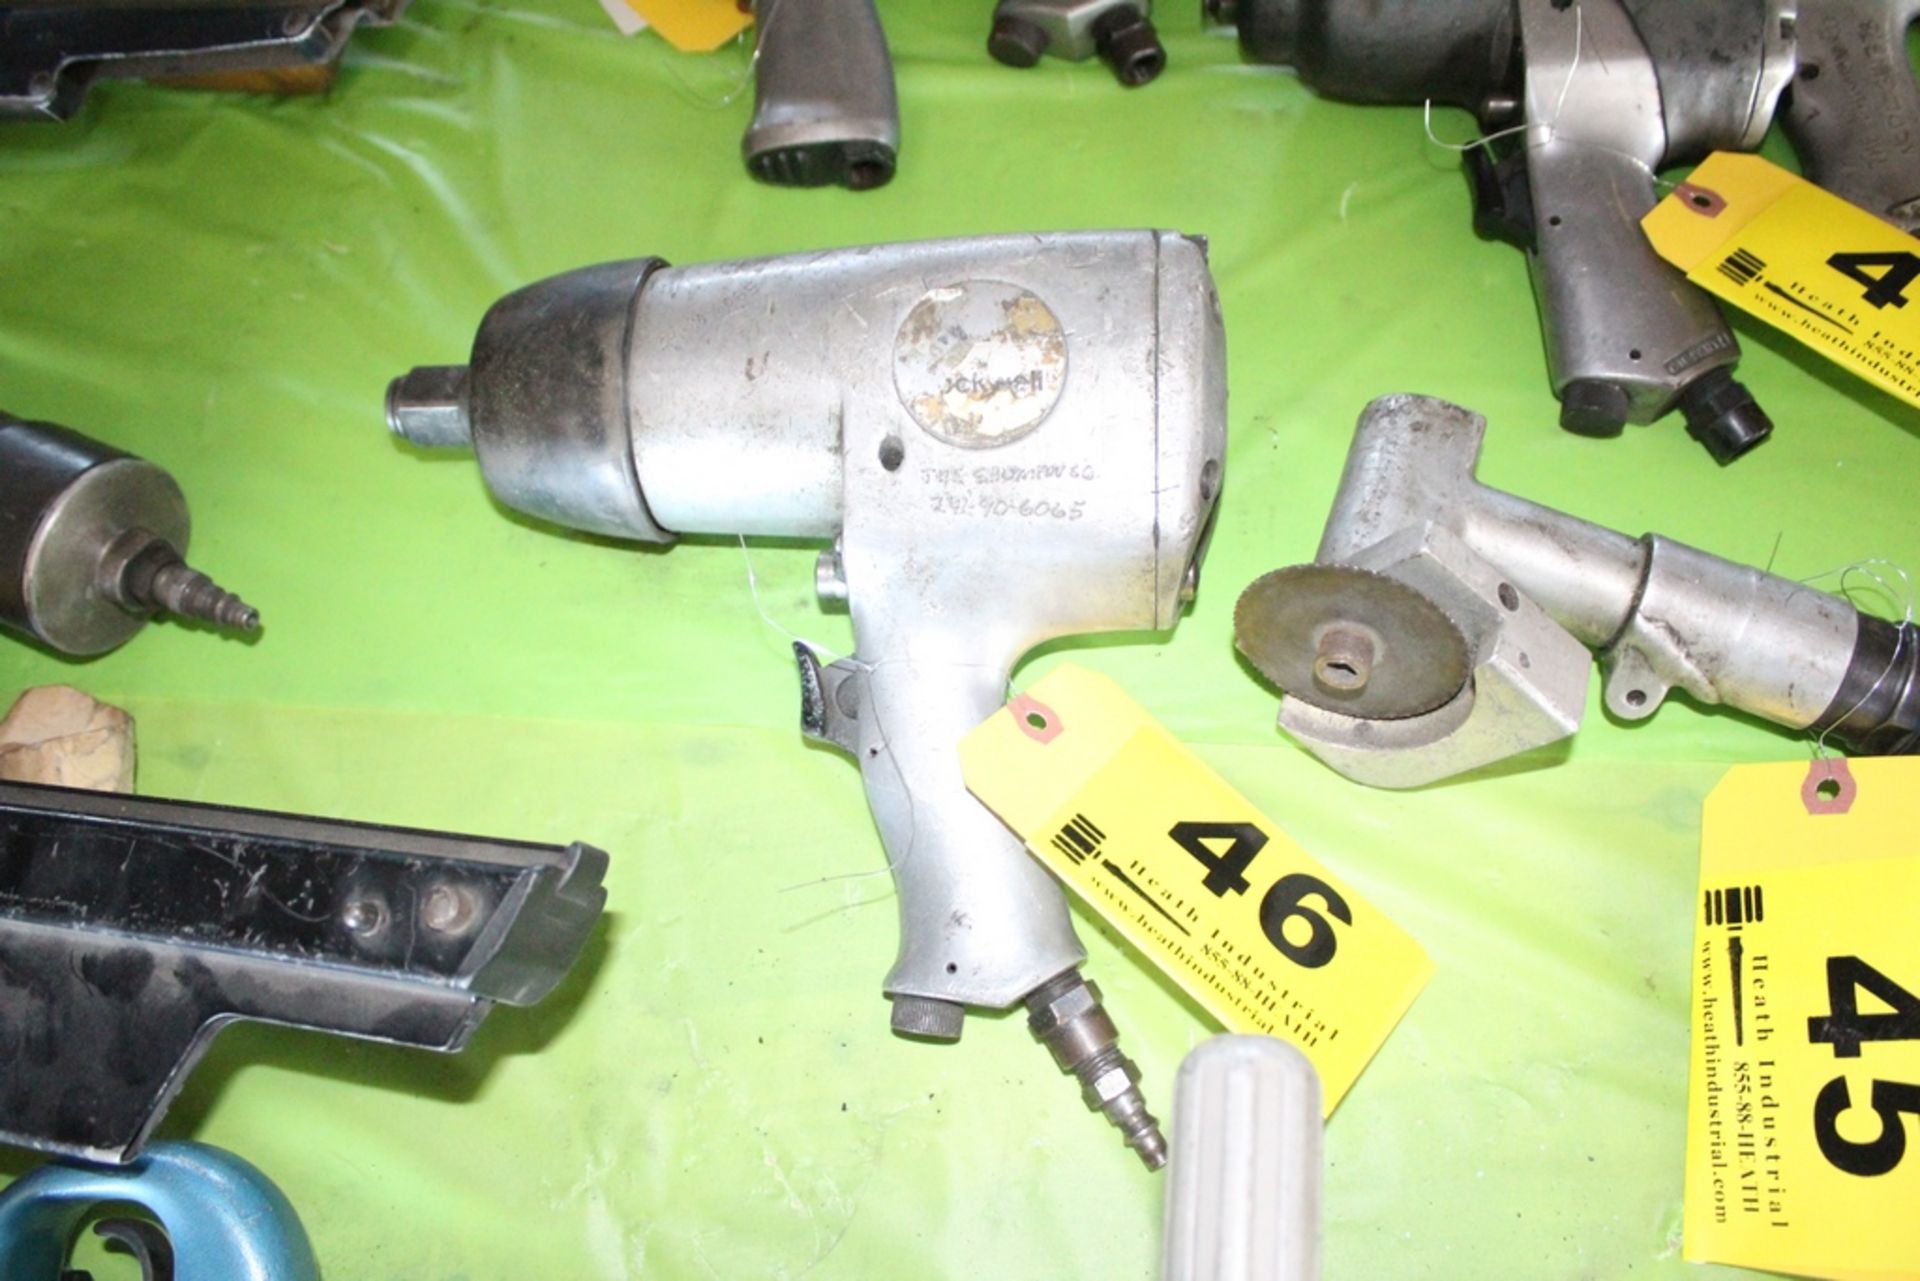 ROCKWELL 3/4" PNEUMATIC IMPACT WRENCH